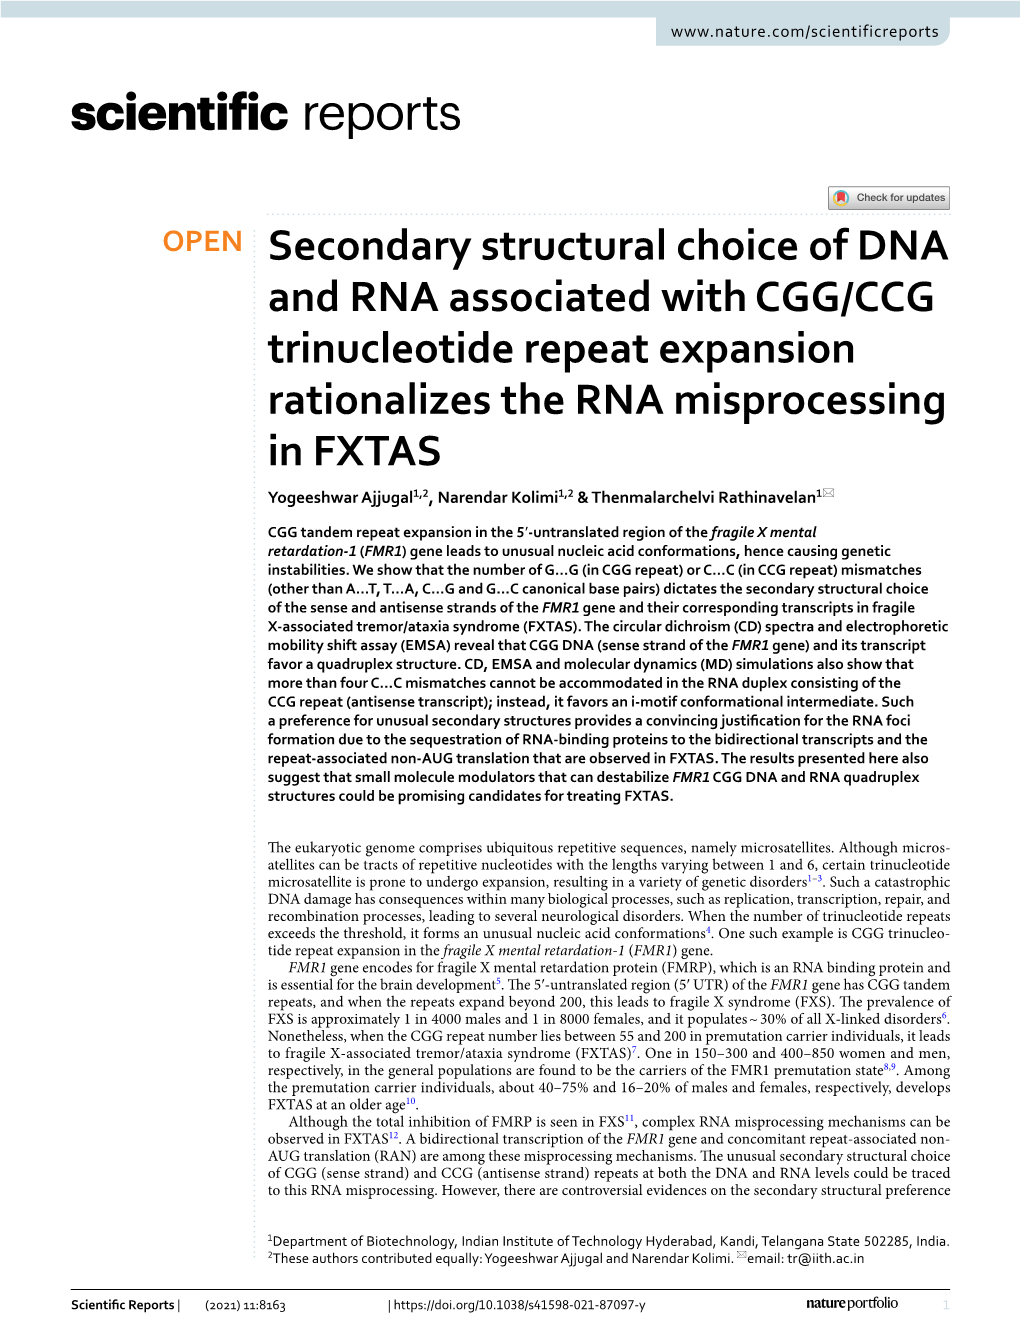 Secondary Structural Choice of DNA and RNA Associated with CGG